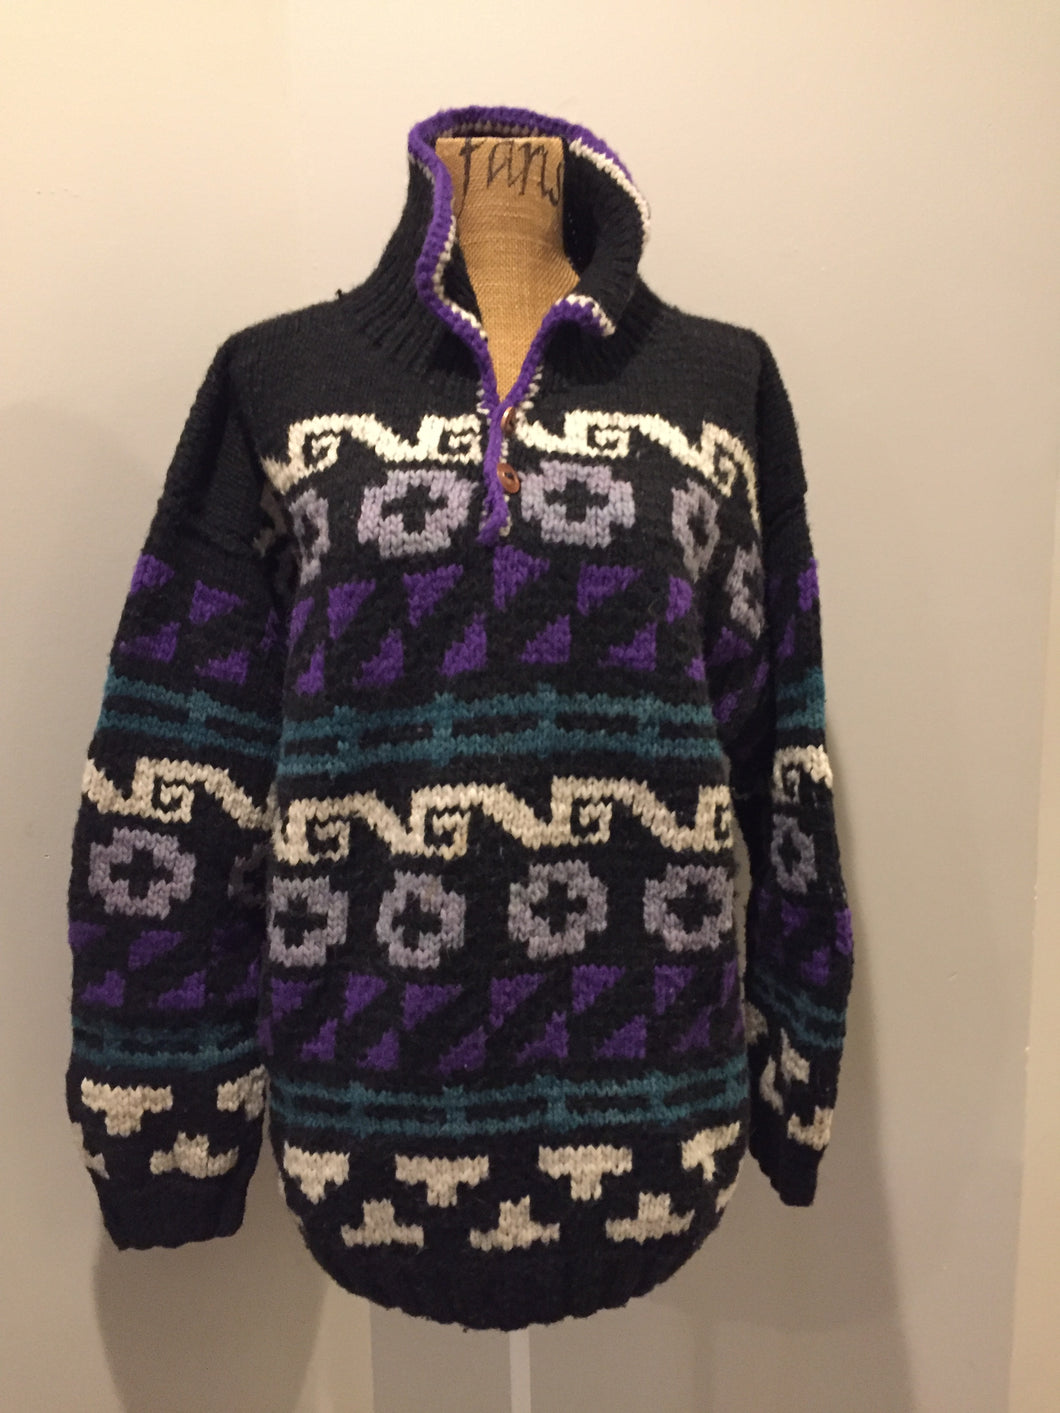 Kingspier Vintage - Amos & Andes Imports quarter button up wool sweater in black, purple, green and cream. Made in Ecuador. Size XL. 